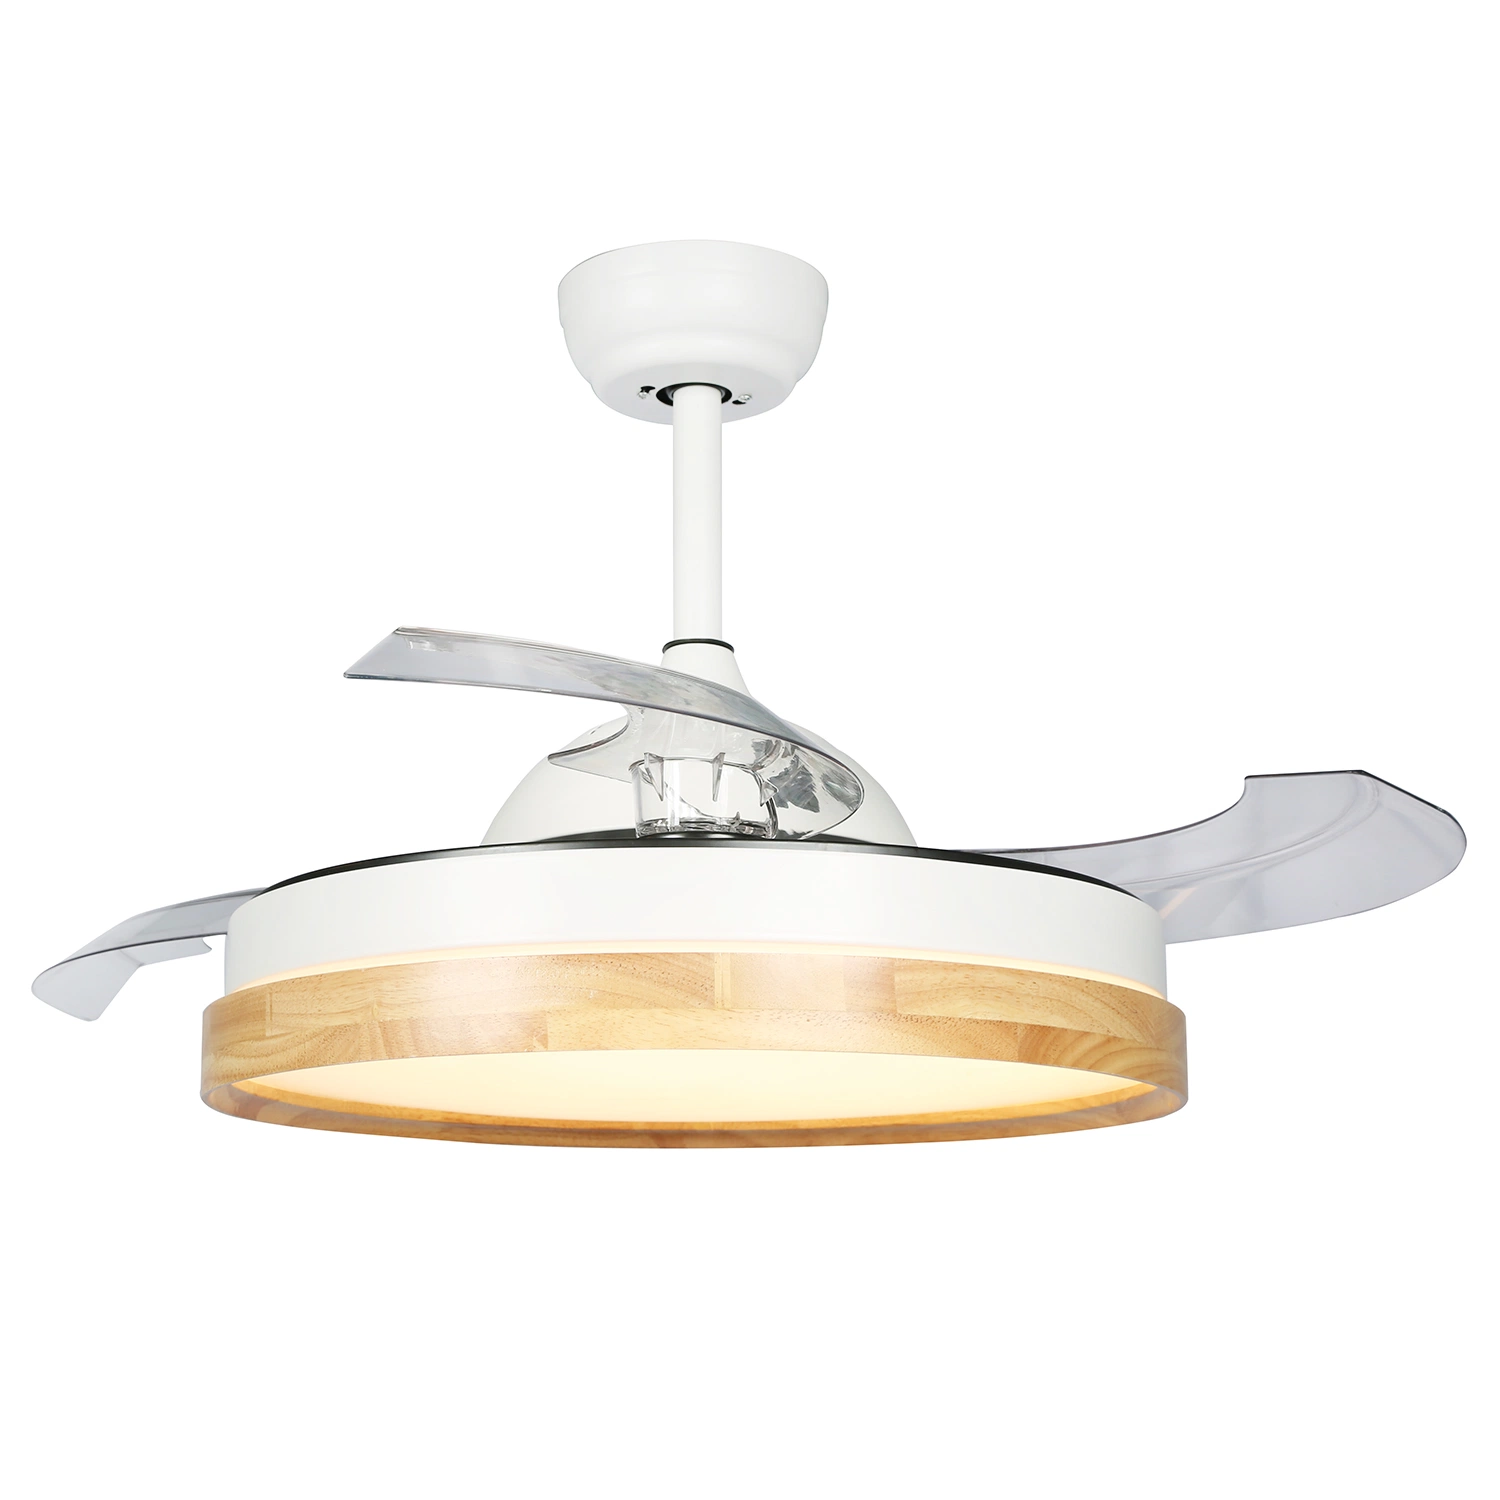 Dimmable and Invisble Ceiling Fan Light DC Motor, Bluetooth APP Control F3122